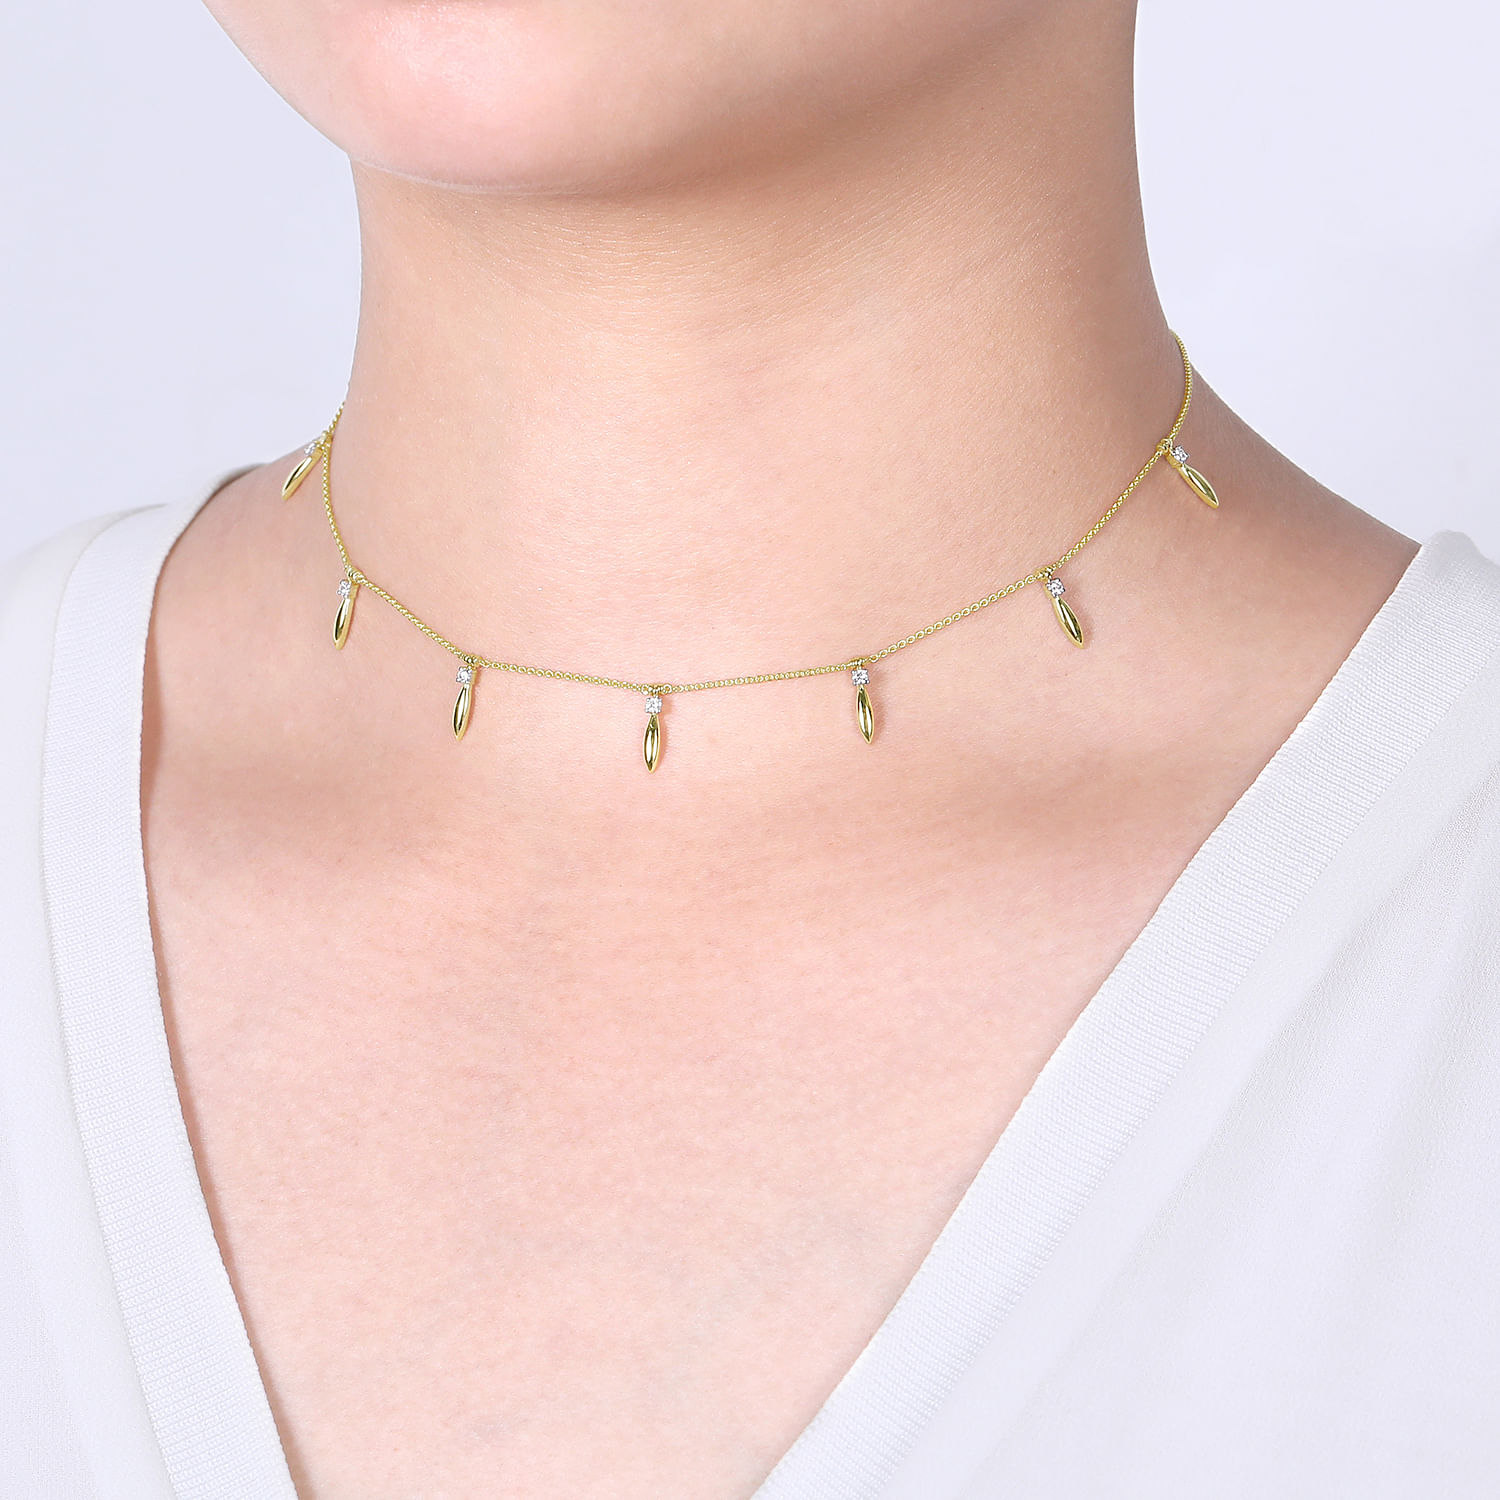 14K Yellow Gold Choker Necklace with Diamond and Spike Drops